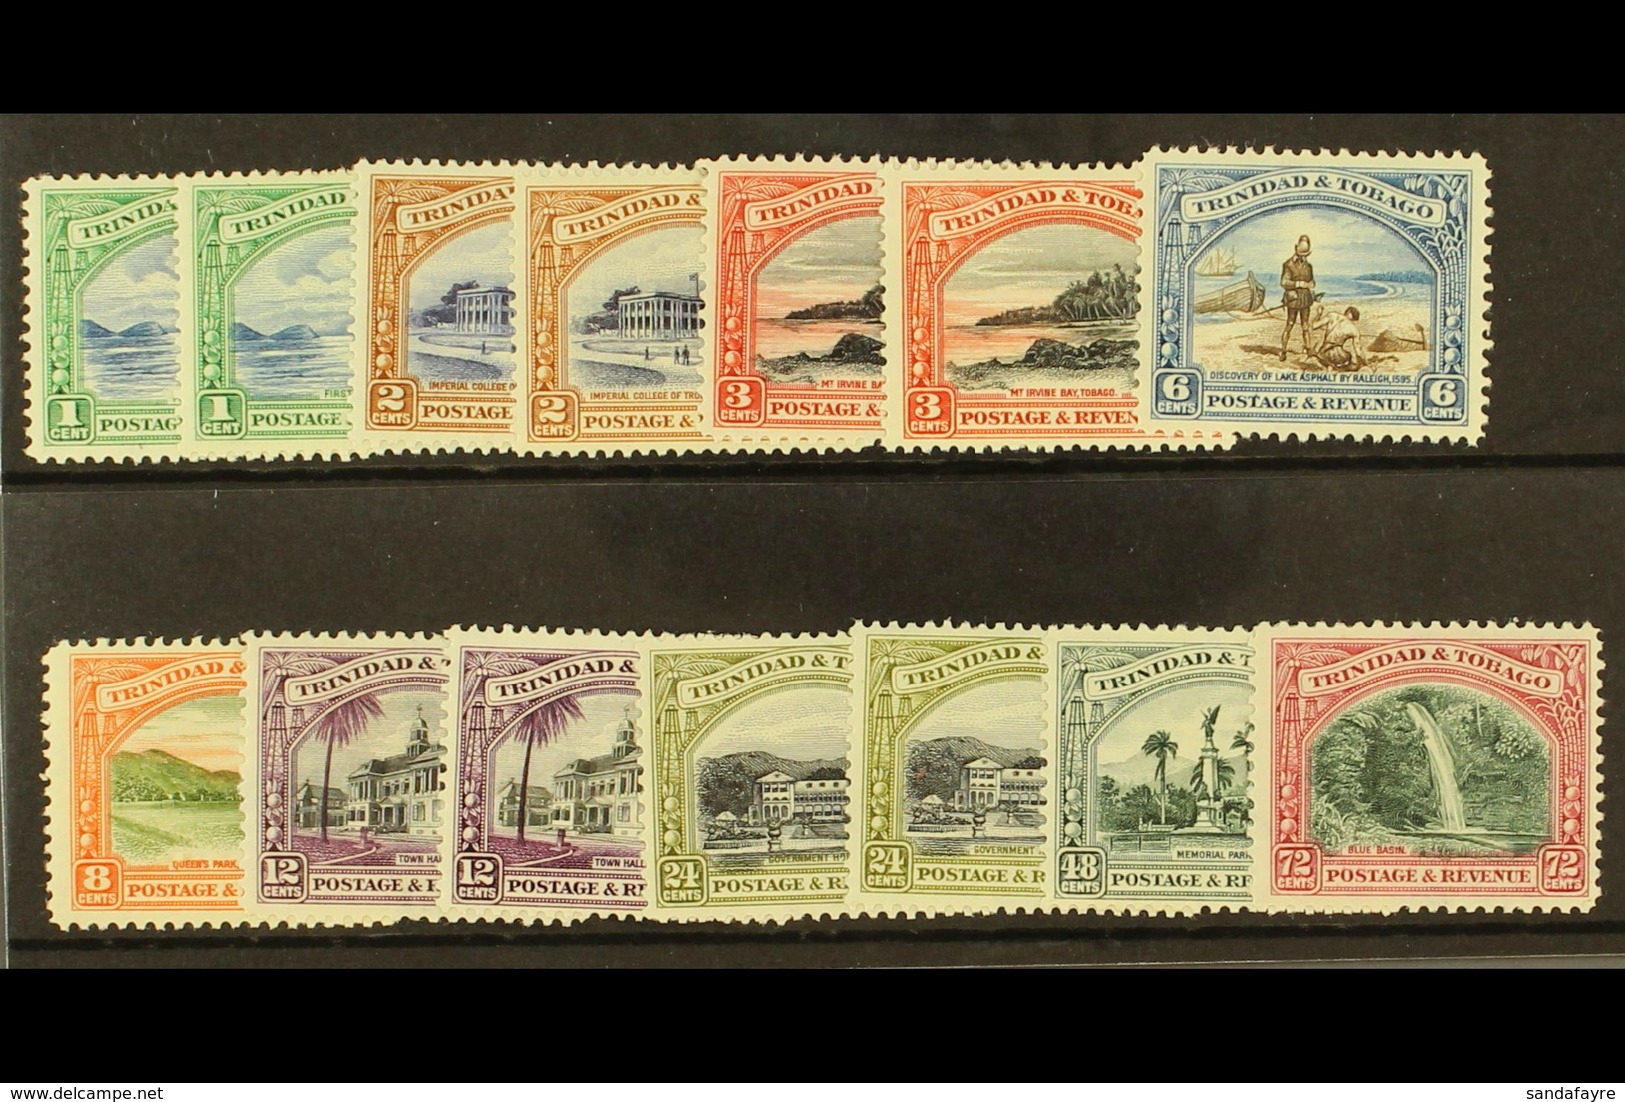 1935-37 Pictorial Set, SG 230/238, With Additional Perf 12½ Values Less 6c, Fine Mint. (14) For More Images, Please Visi - Trinidad & Tobago (...-1961)